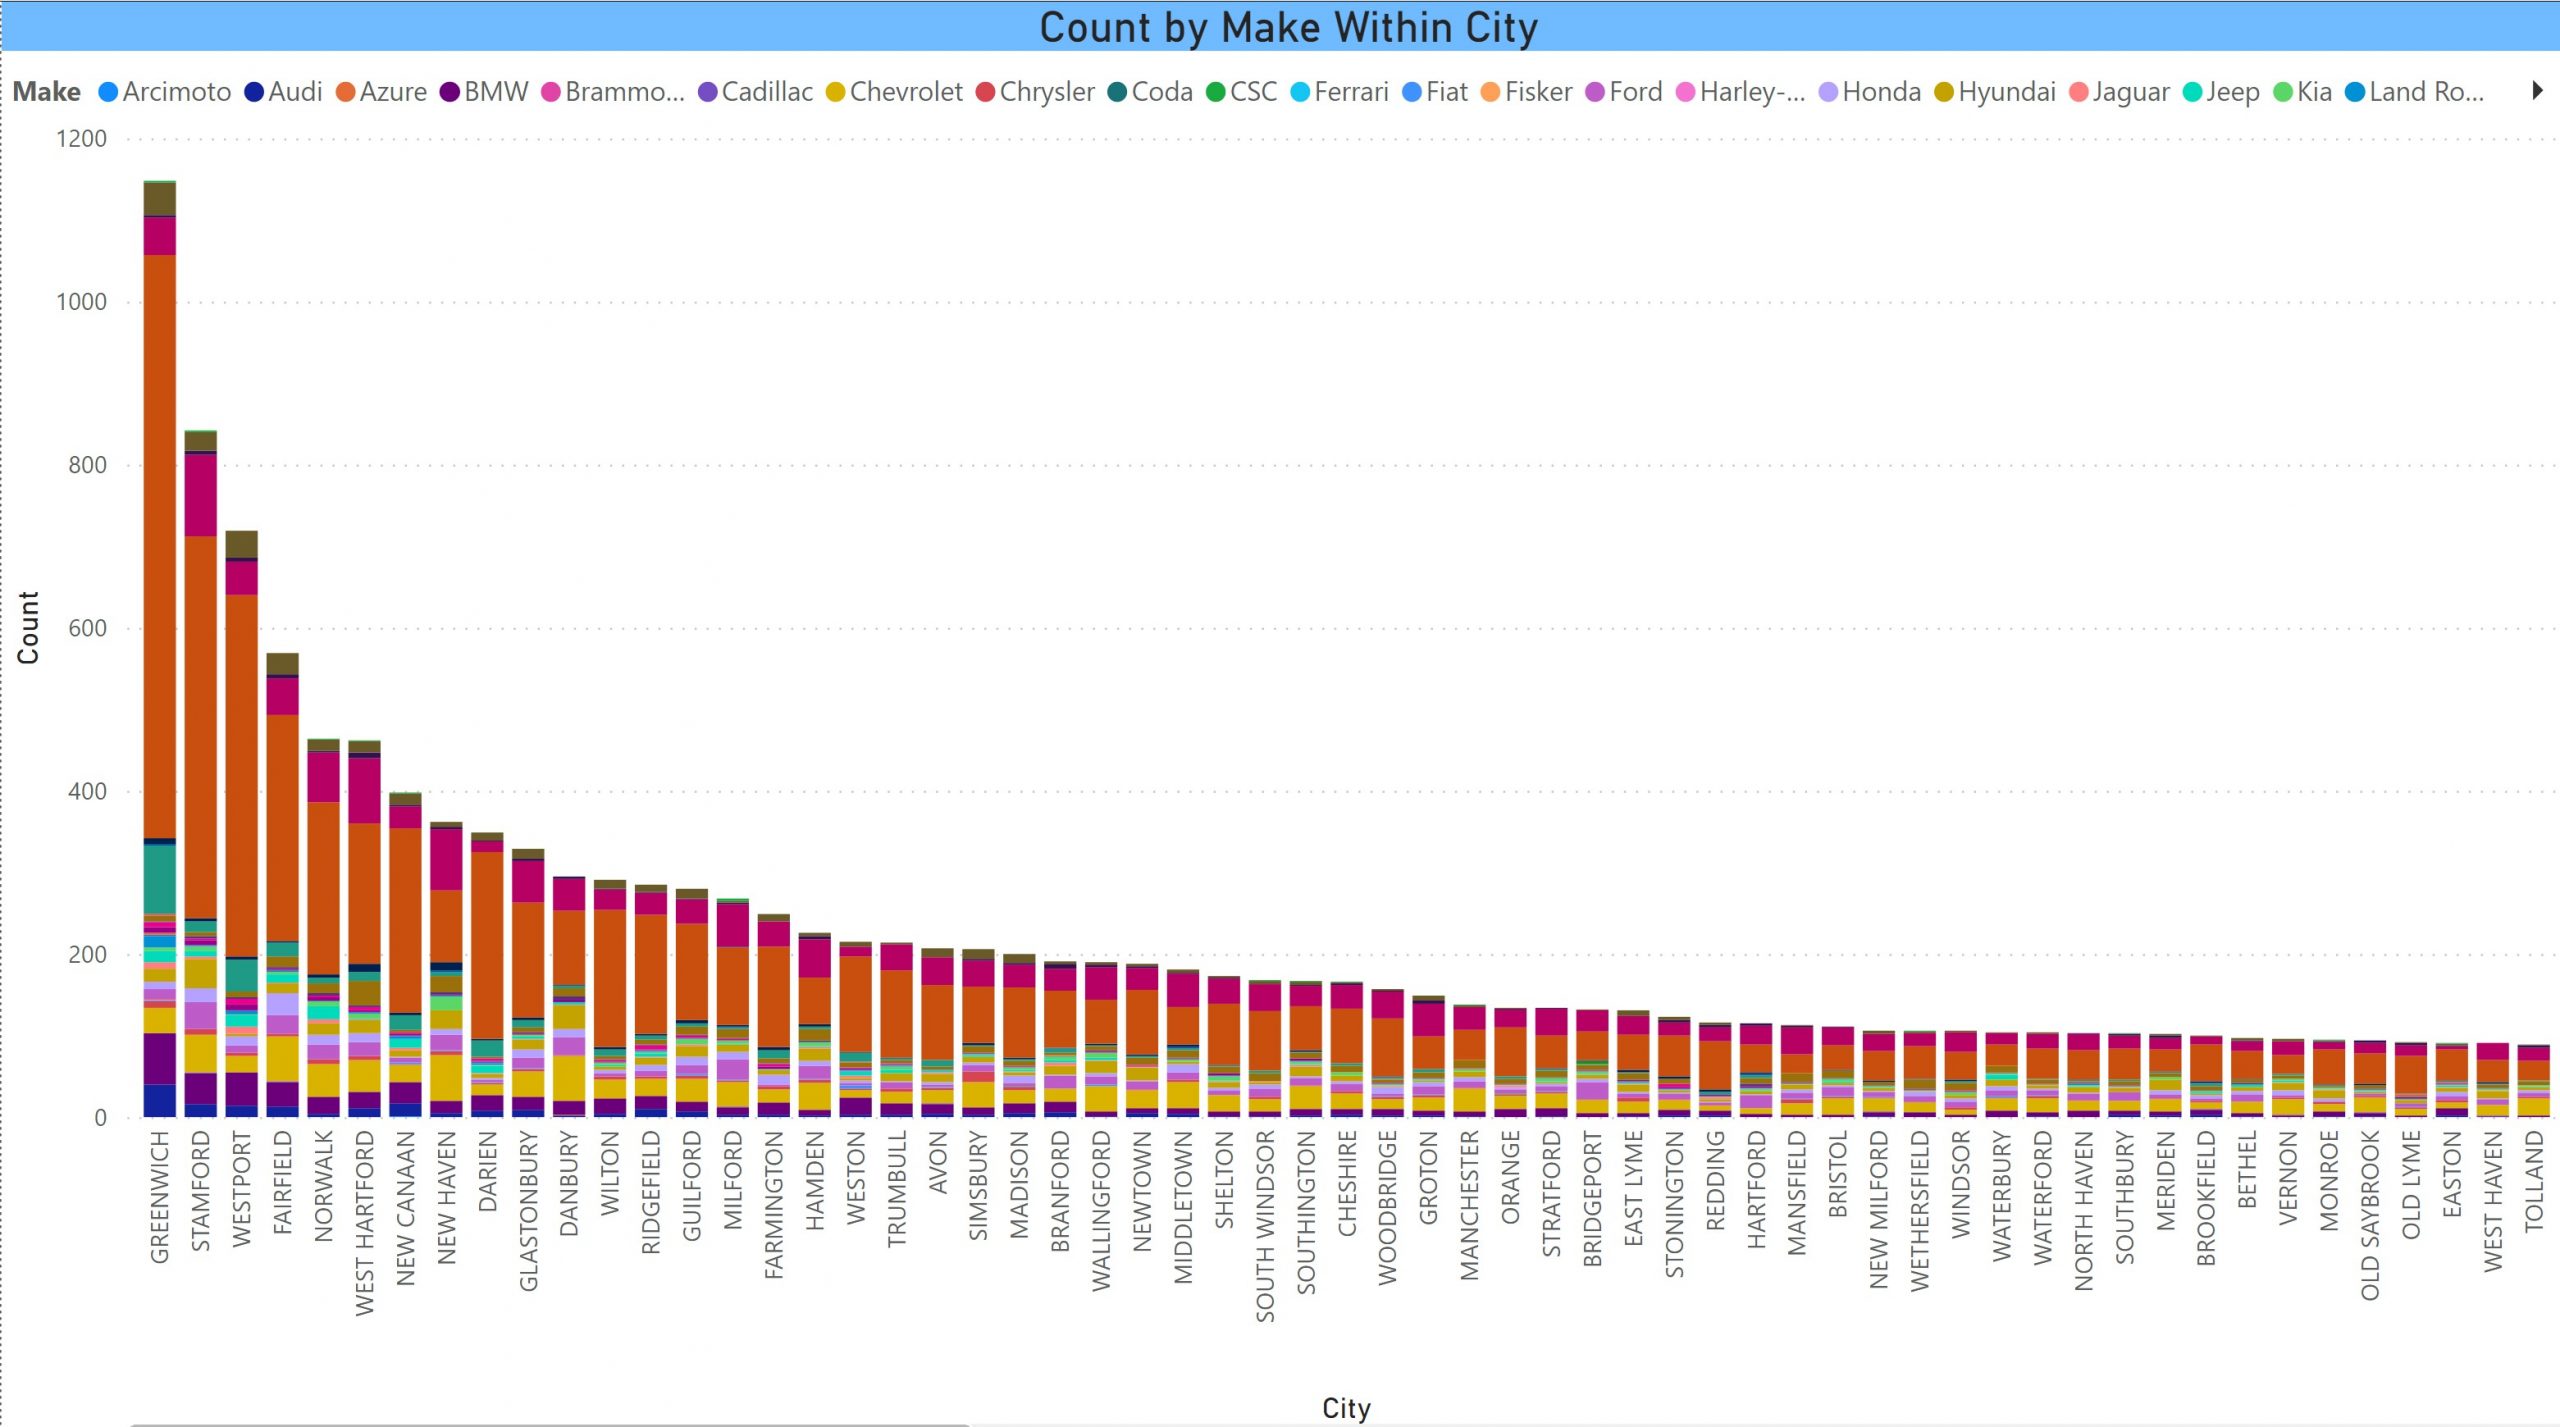 EVs by Make by City